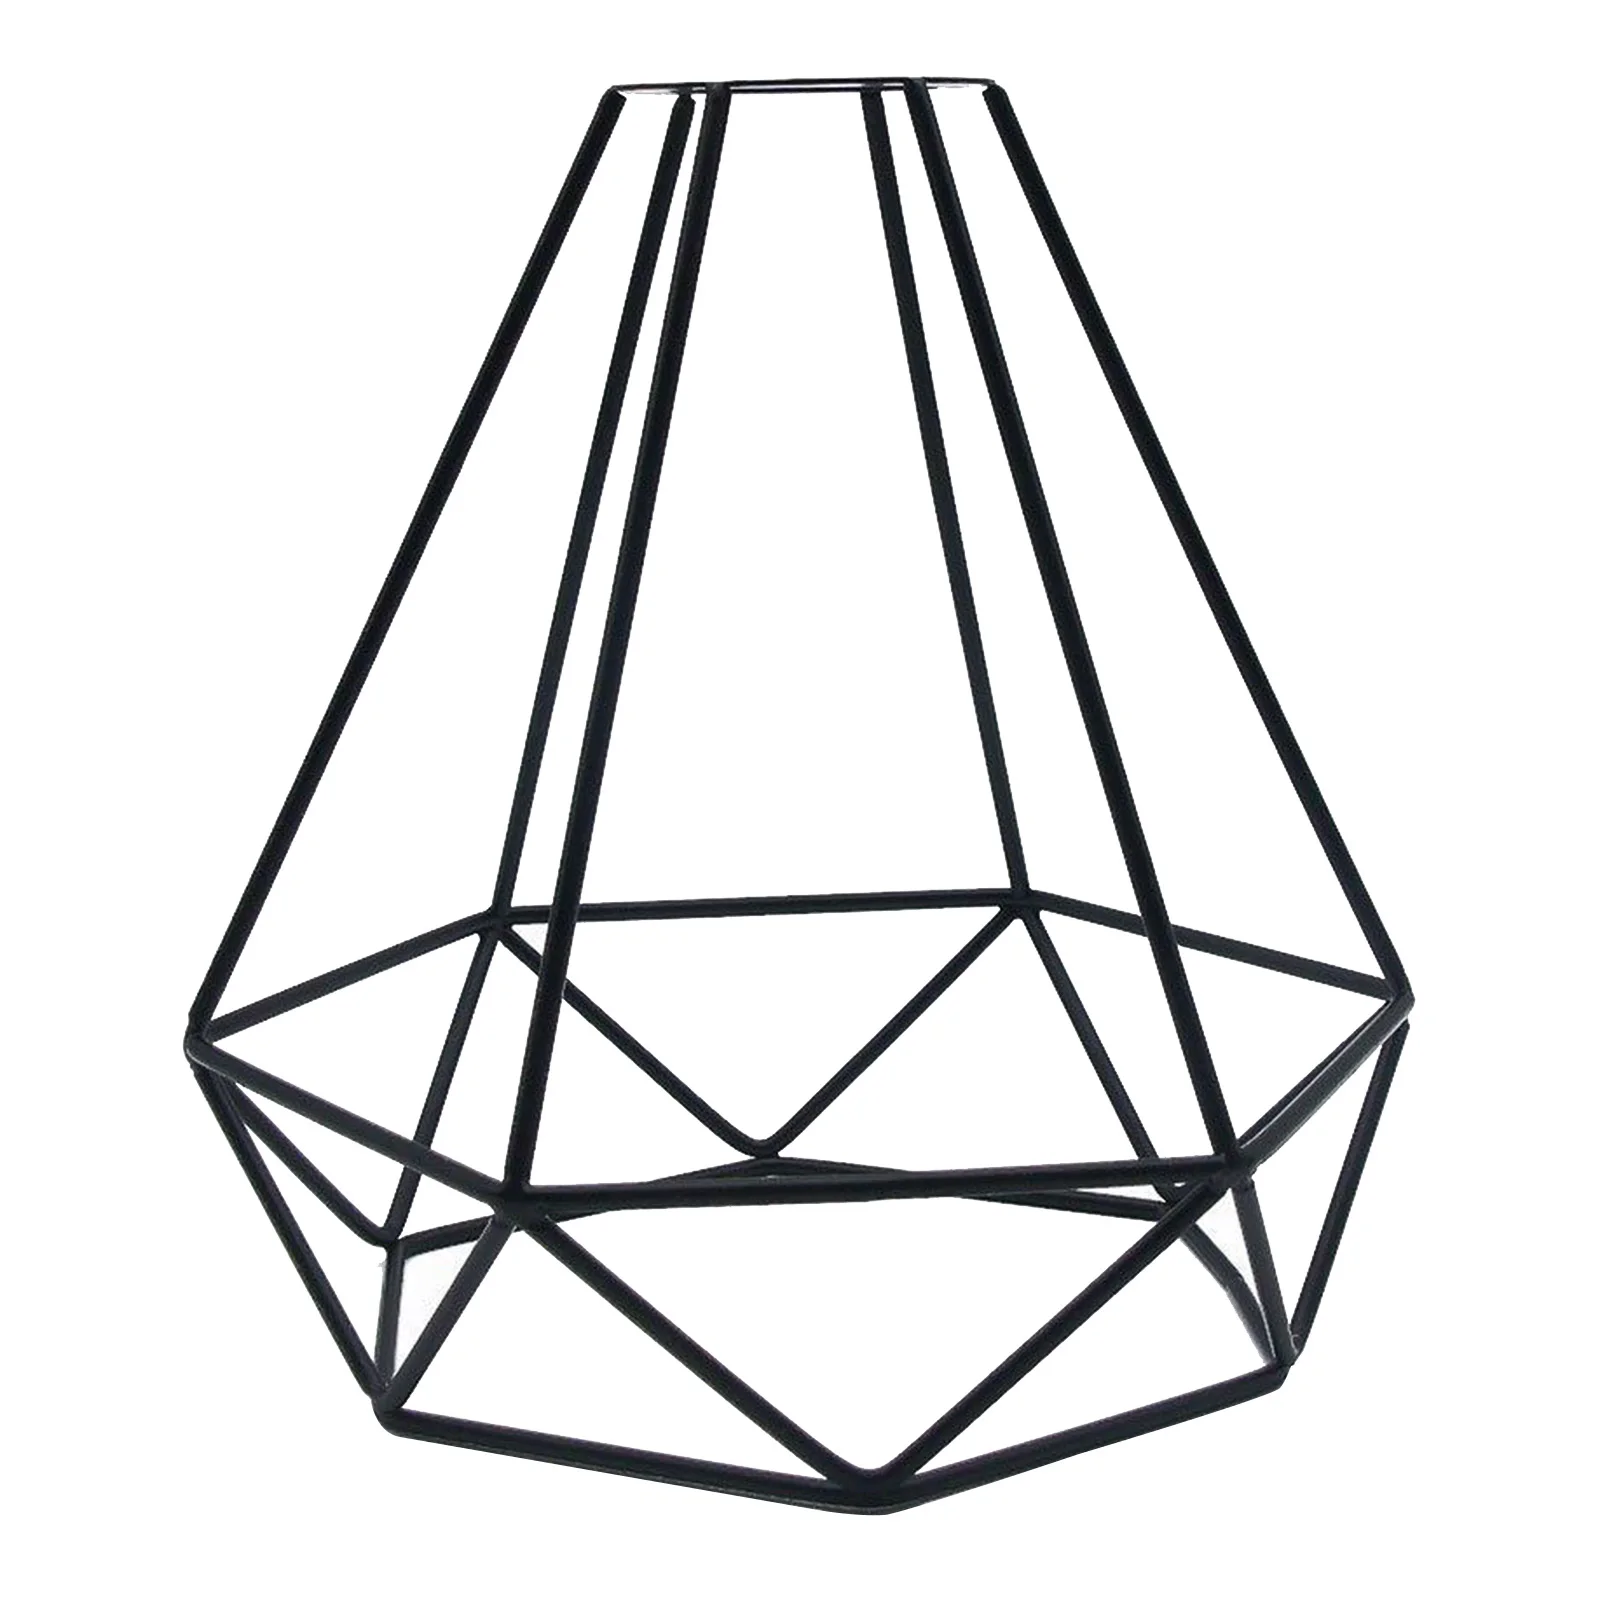 Lampshade Only Retro Metal Wire Cage Diamond Shaped Hanging Pendant Light Shade Chandelier Lamp Cover Without Bulb